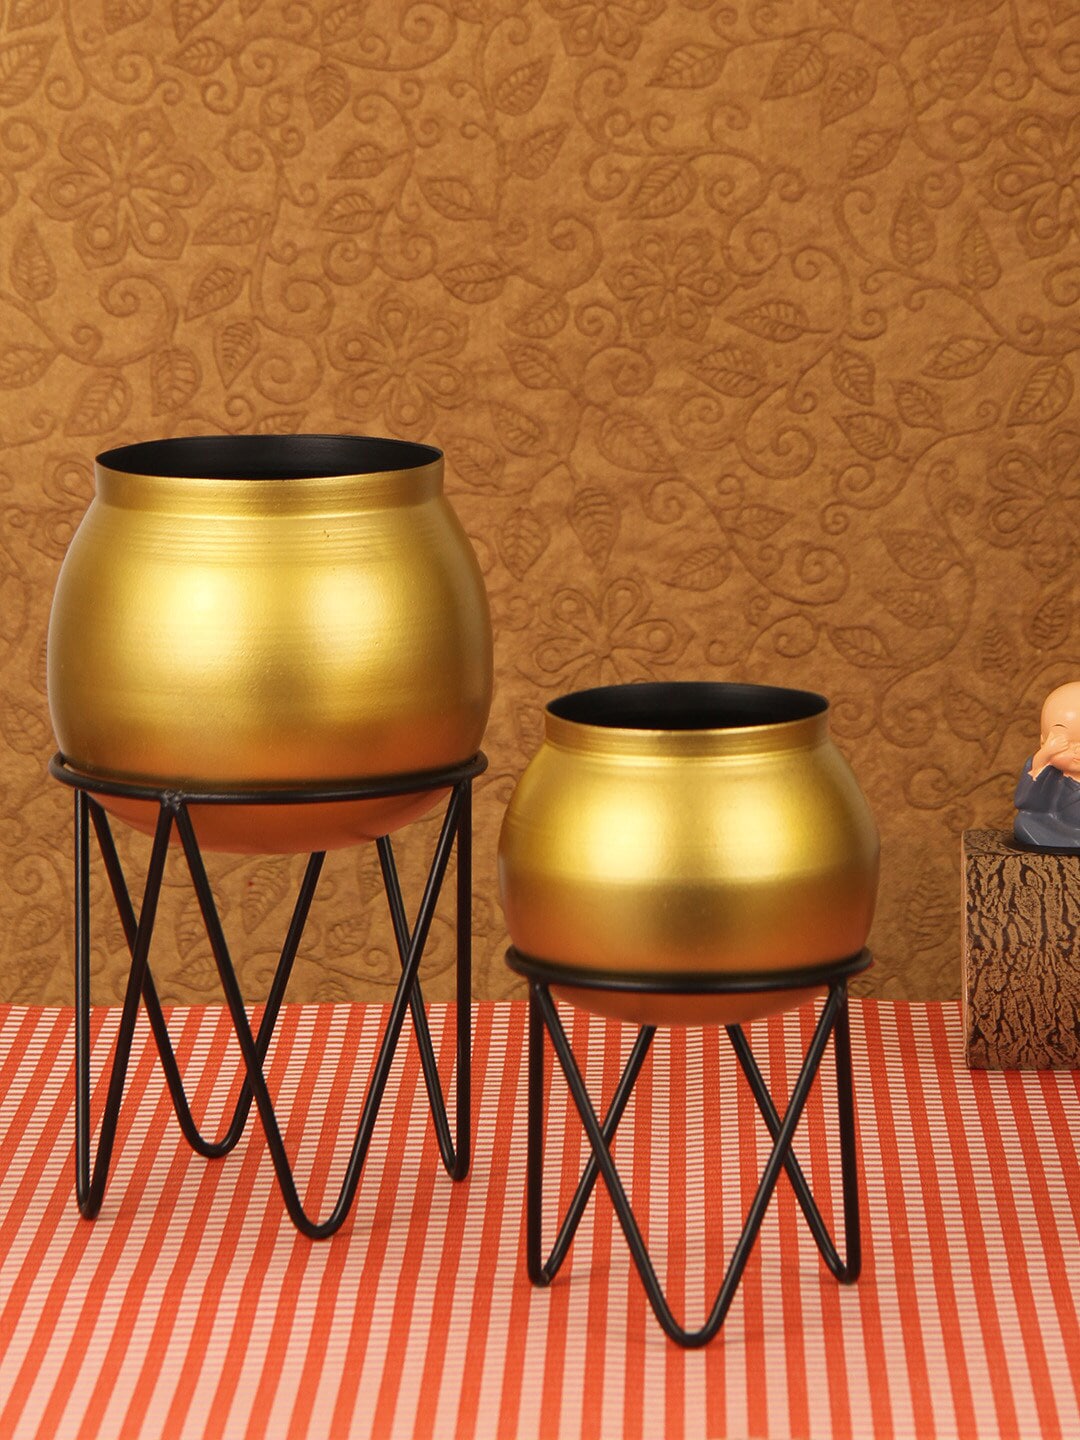 TIED RIBBONS Set Of 2 Gold-Toned & Black Metal Table-Top Planters With Stands Price in India